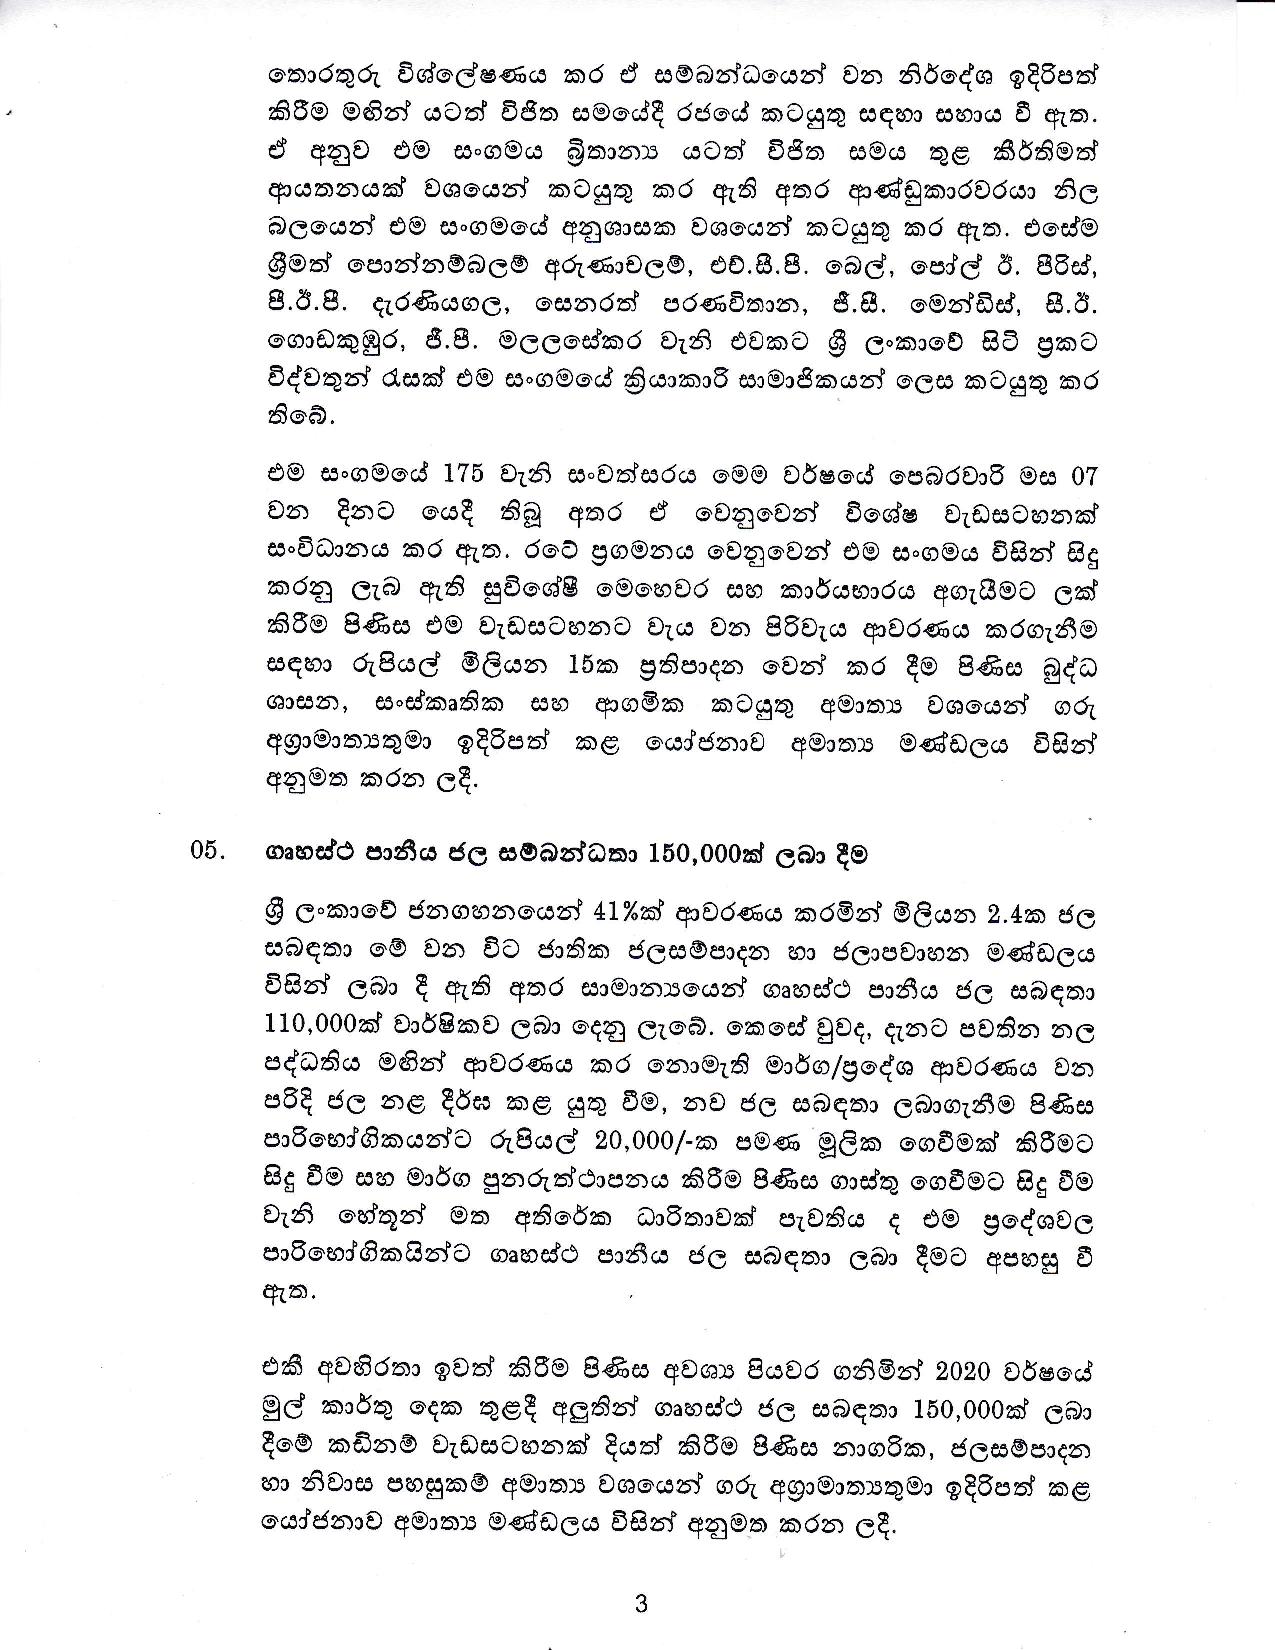 Cabinet Decision on 04.03.2020 page 003